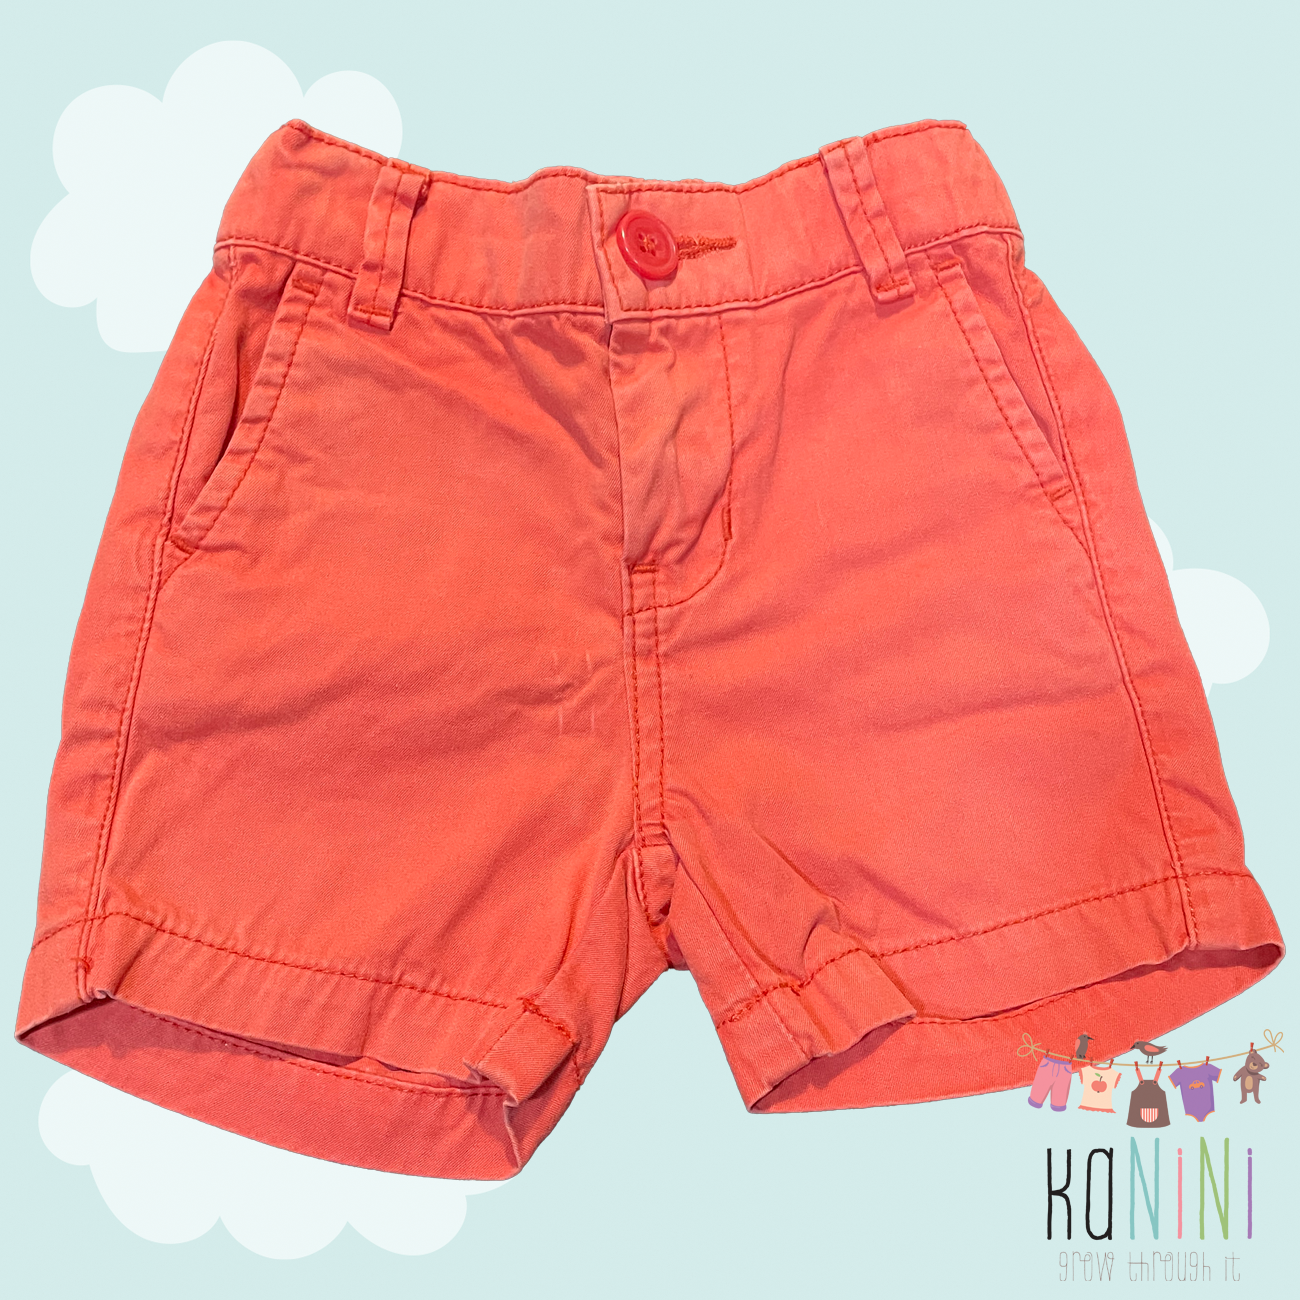 Featured image for “Country Road 6 - 12 Months Boys Orange Shorts”